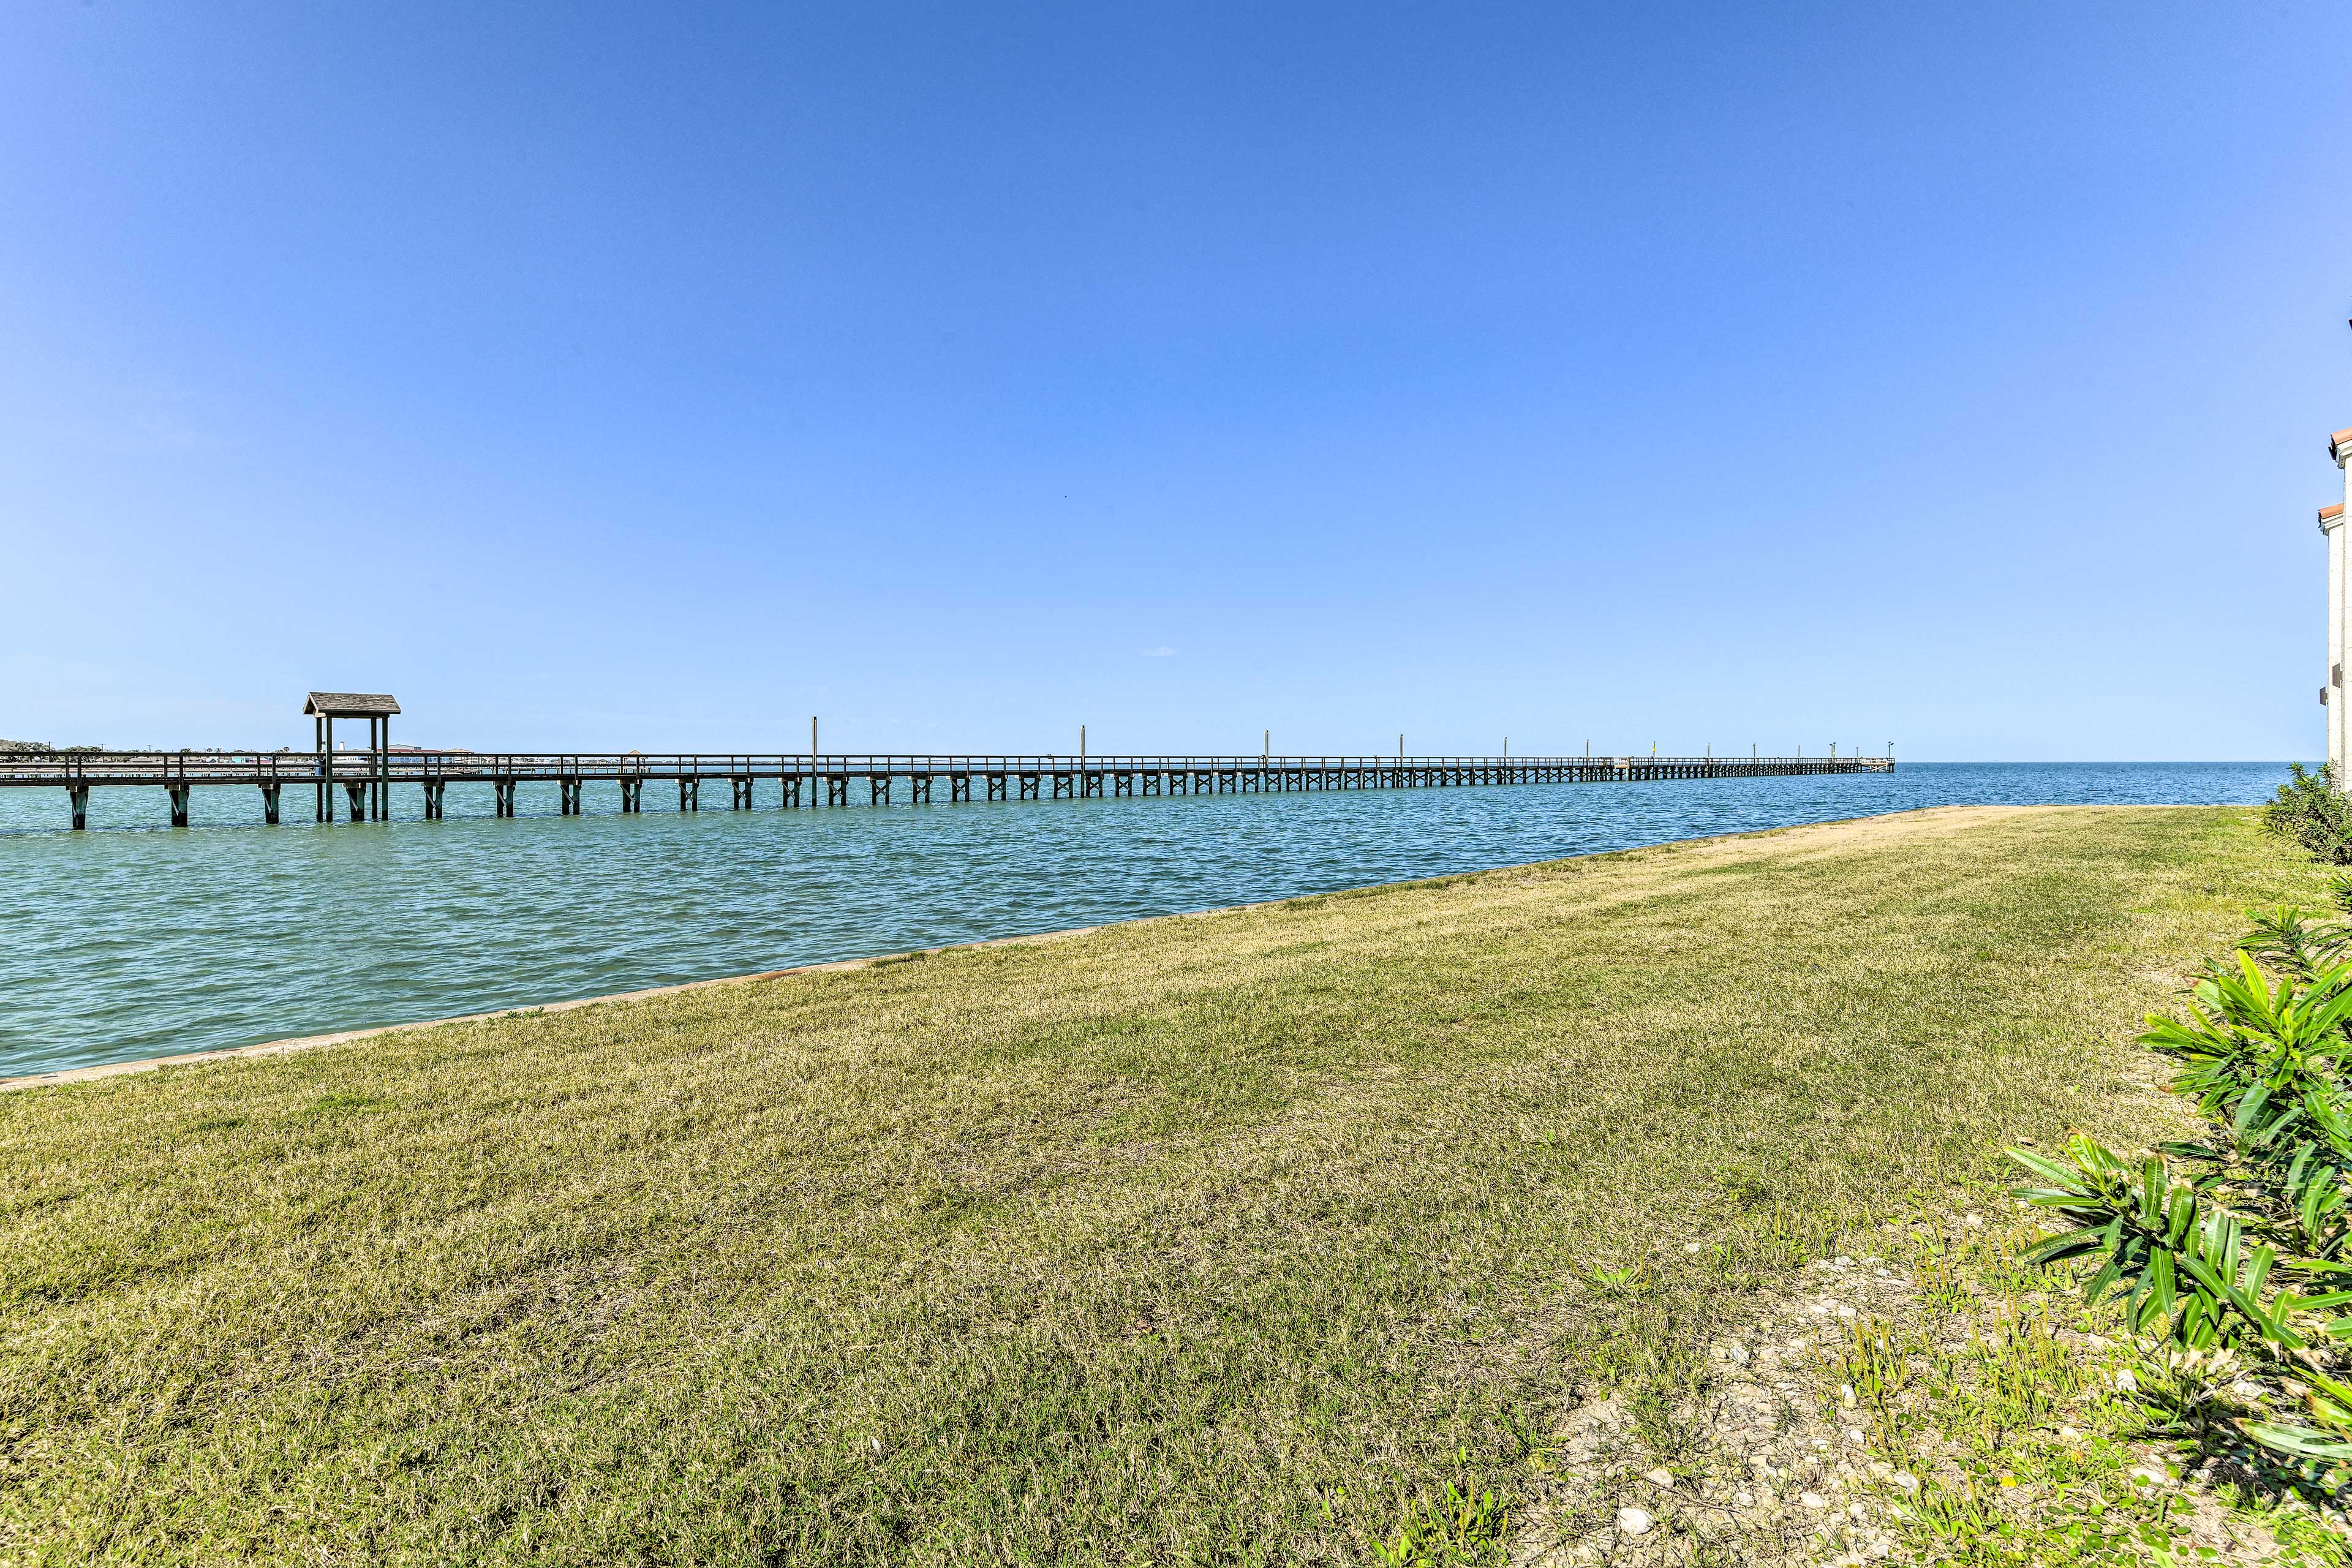 Blue skies in Rockport, TX with green grass in the foreground and a pier in the water through the center